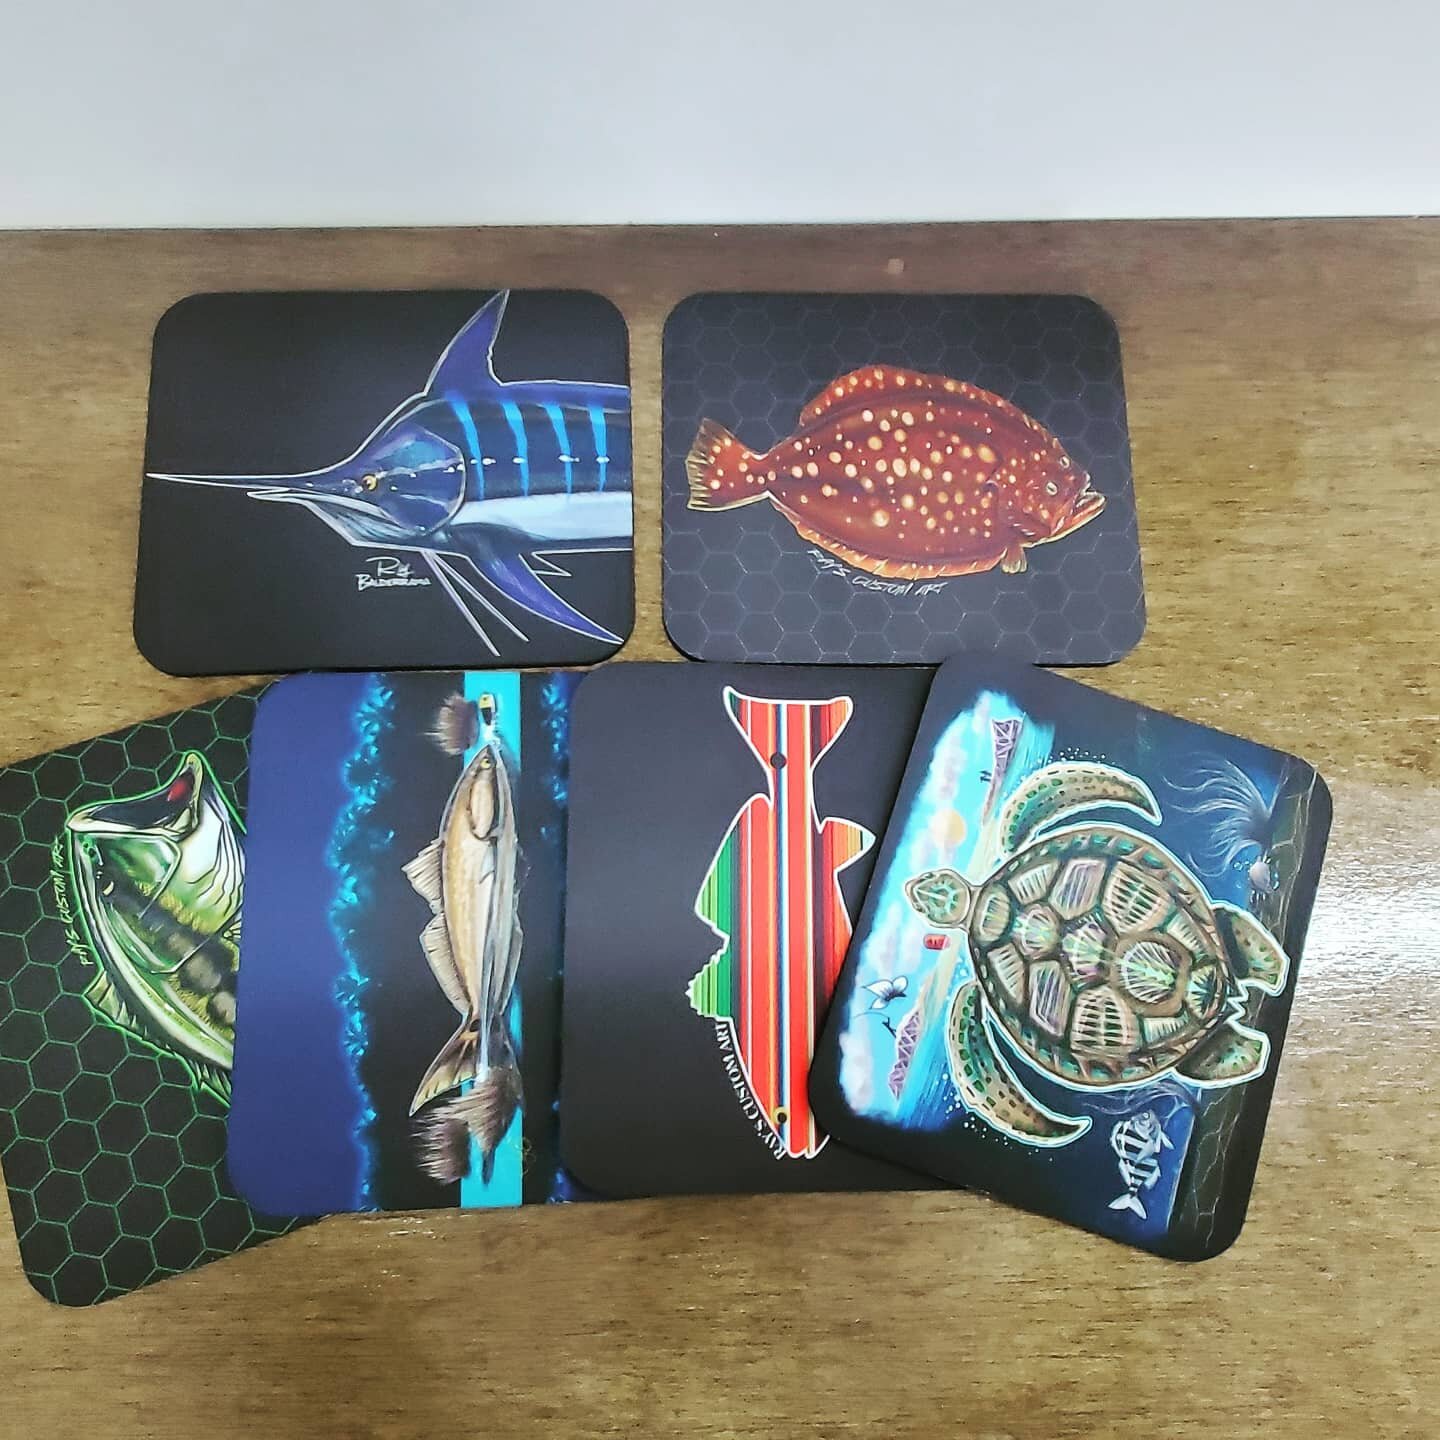 Mousepads are available right now and on SALE for all my desk jockeys.
#fishing #fish #art #mousepad #mouseandkeyboard #marlin #turtles #flounder #bass #redfish